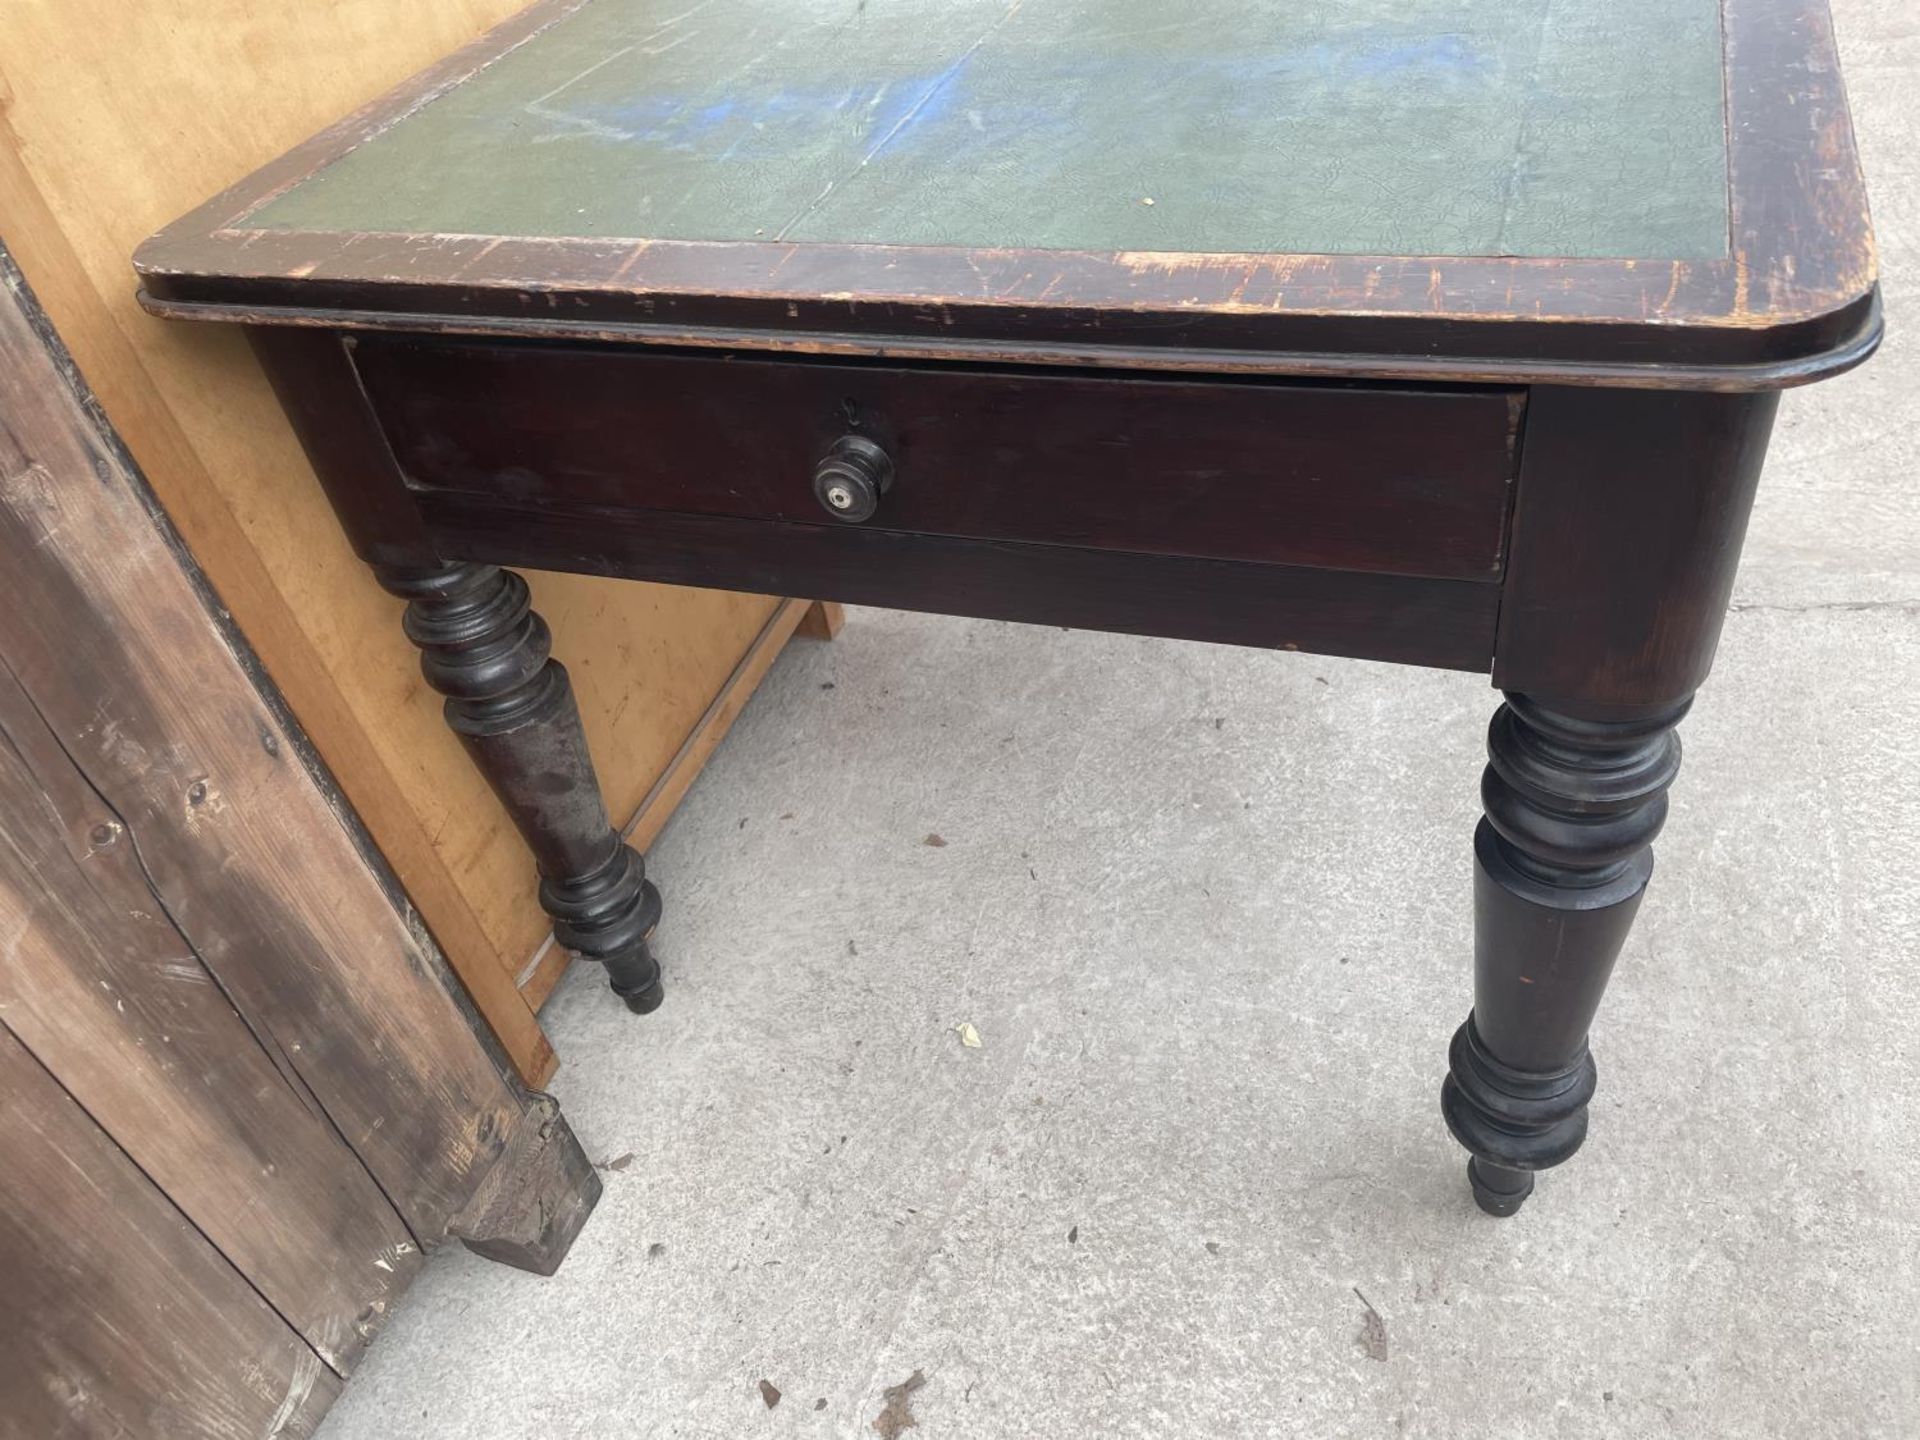 A VICTORIAN PINE OFFICE TABLE WITH TWO DRAWERS, ON TURNED LEGS, 71X36" WITH INSET LEATHERETTE TOP - Image 2 of 5